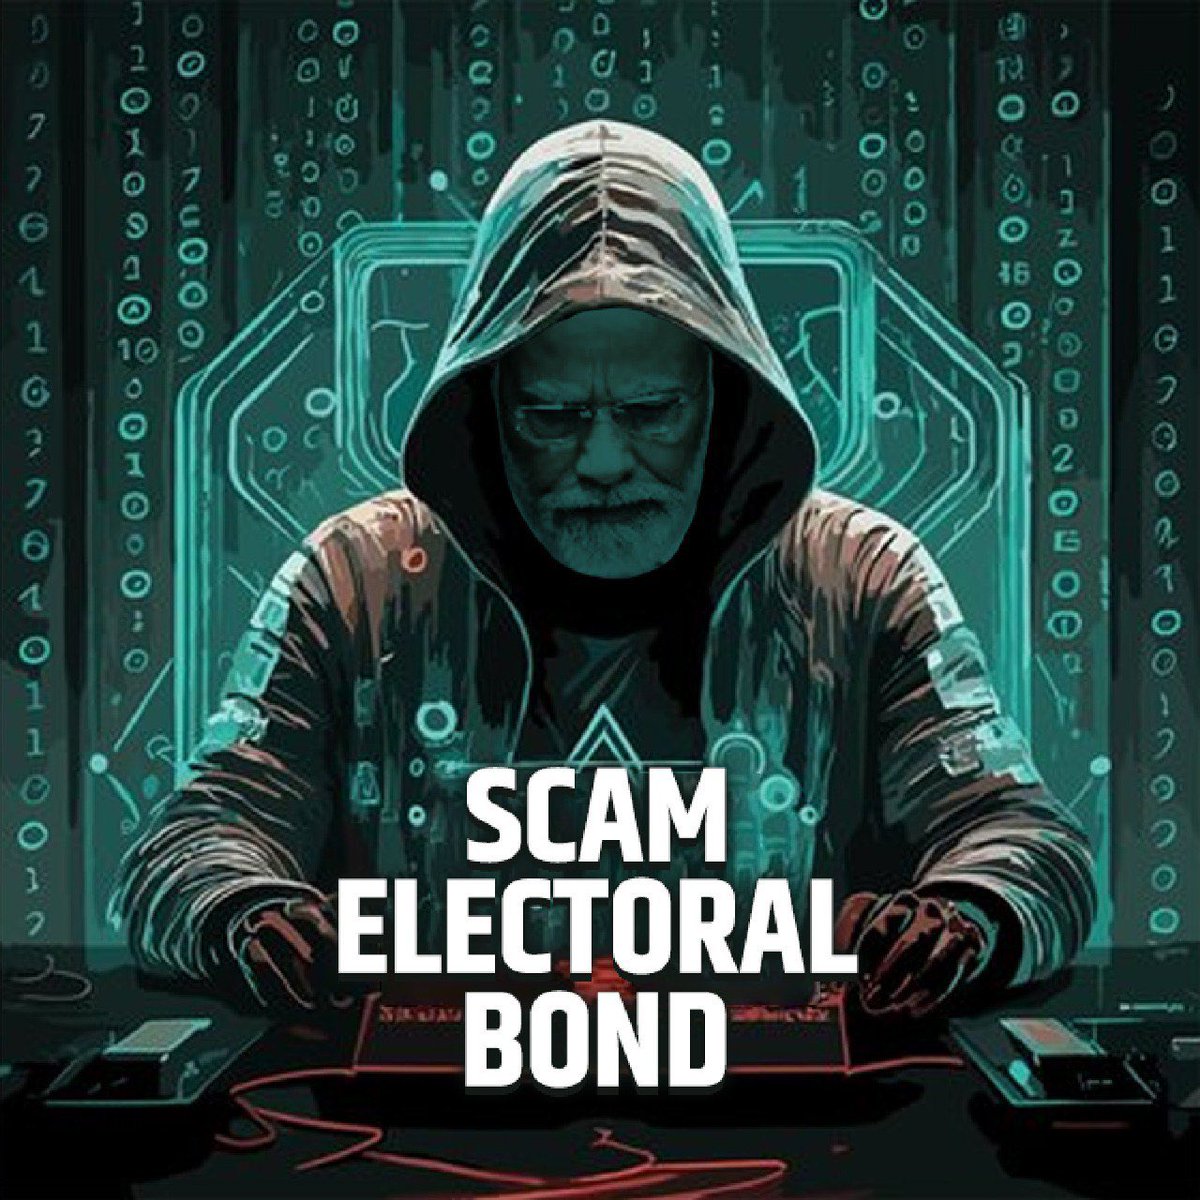 The Electoral Bond Scam is easily one of the biggest scams to have happened since independence. @BJP4India claimed that it is ‘The party with a difference’. But the only difference BJP introduced is organised corporate corruption and oligarchic model instead of an individual